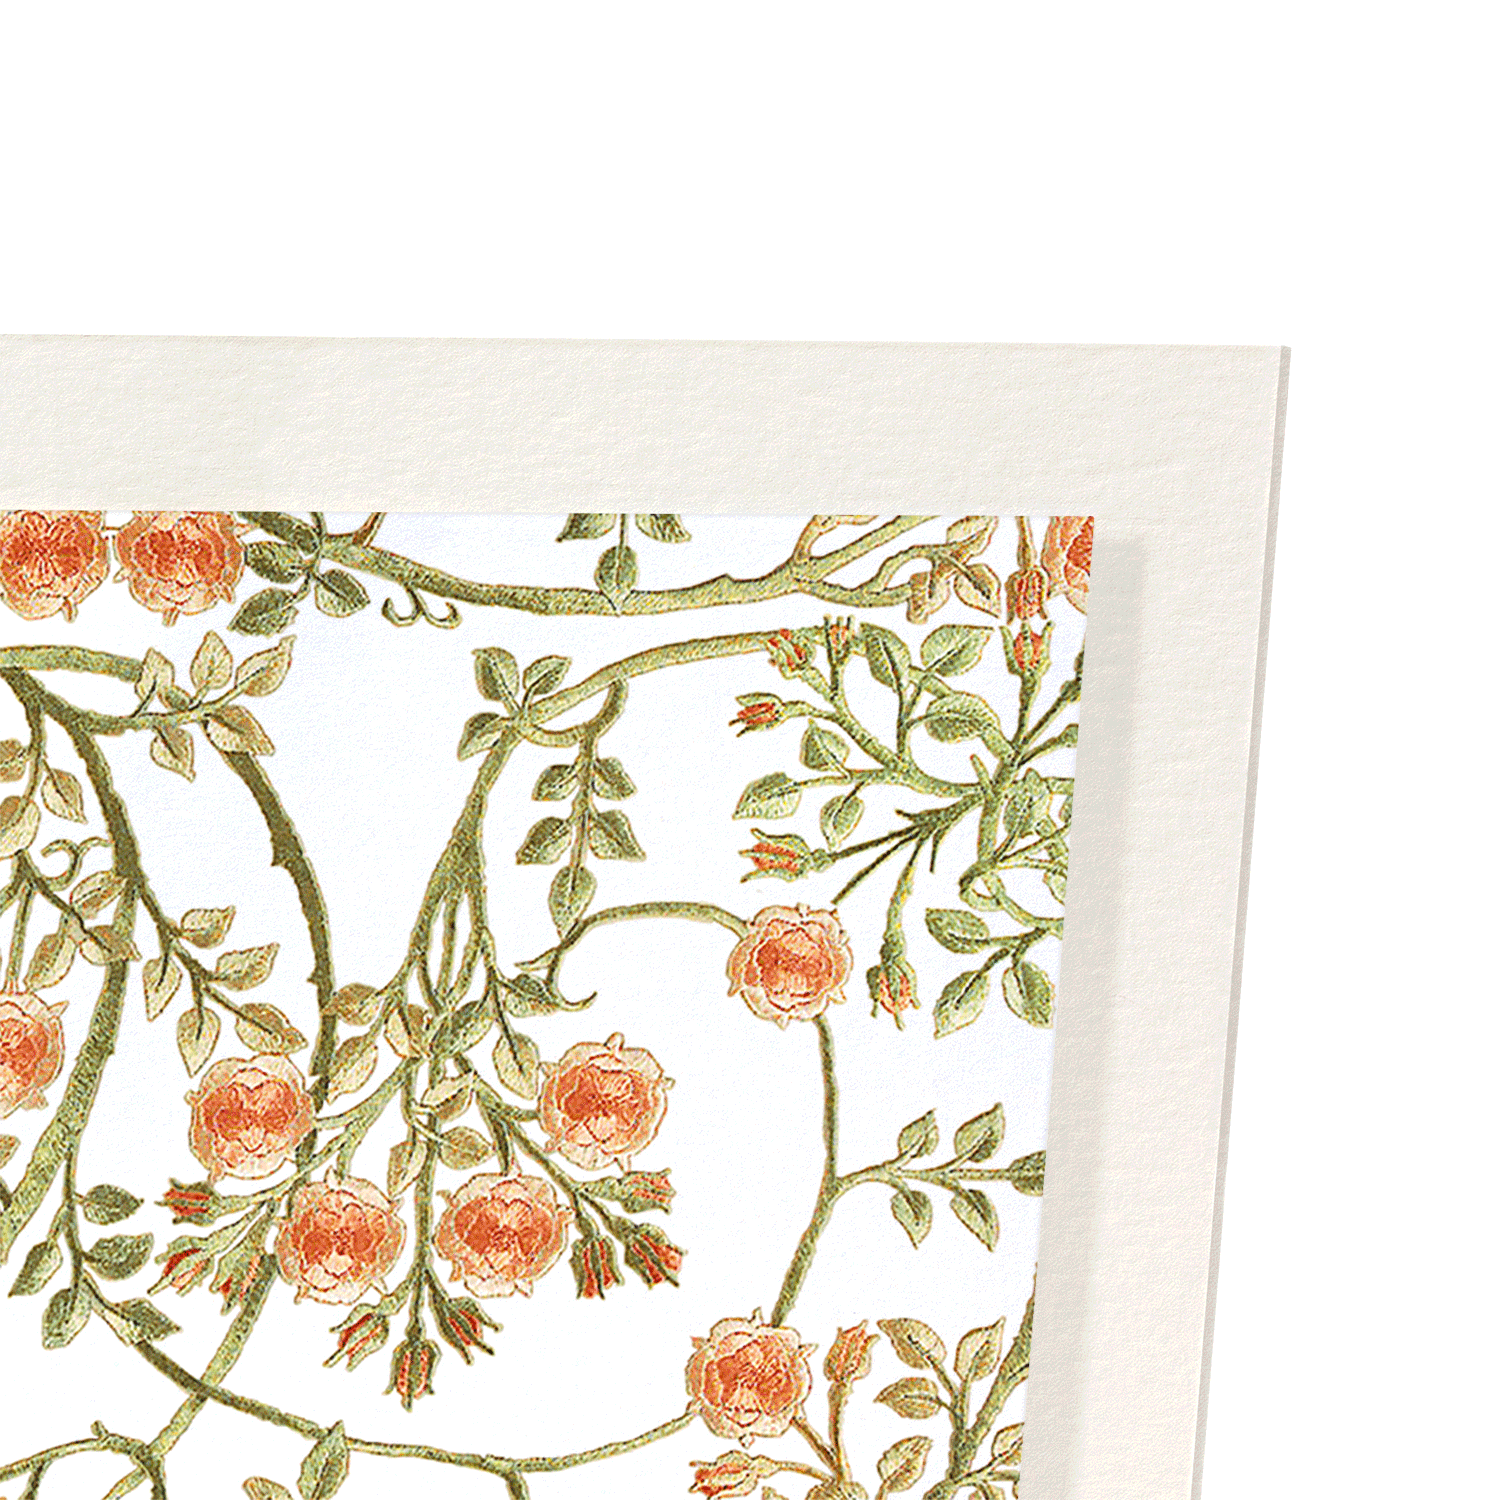 BRIAR ROSES EMBROIDERY: Pattern Art Print